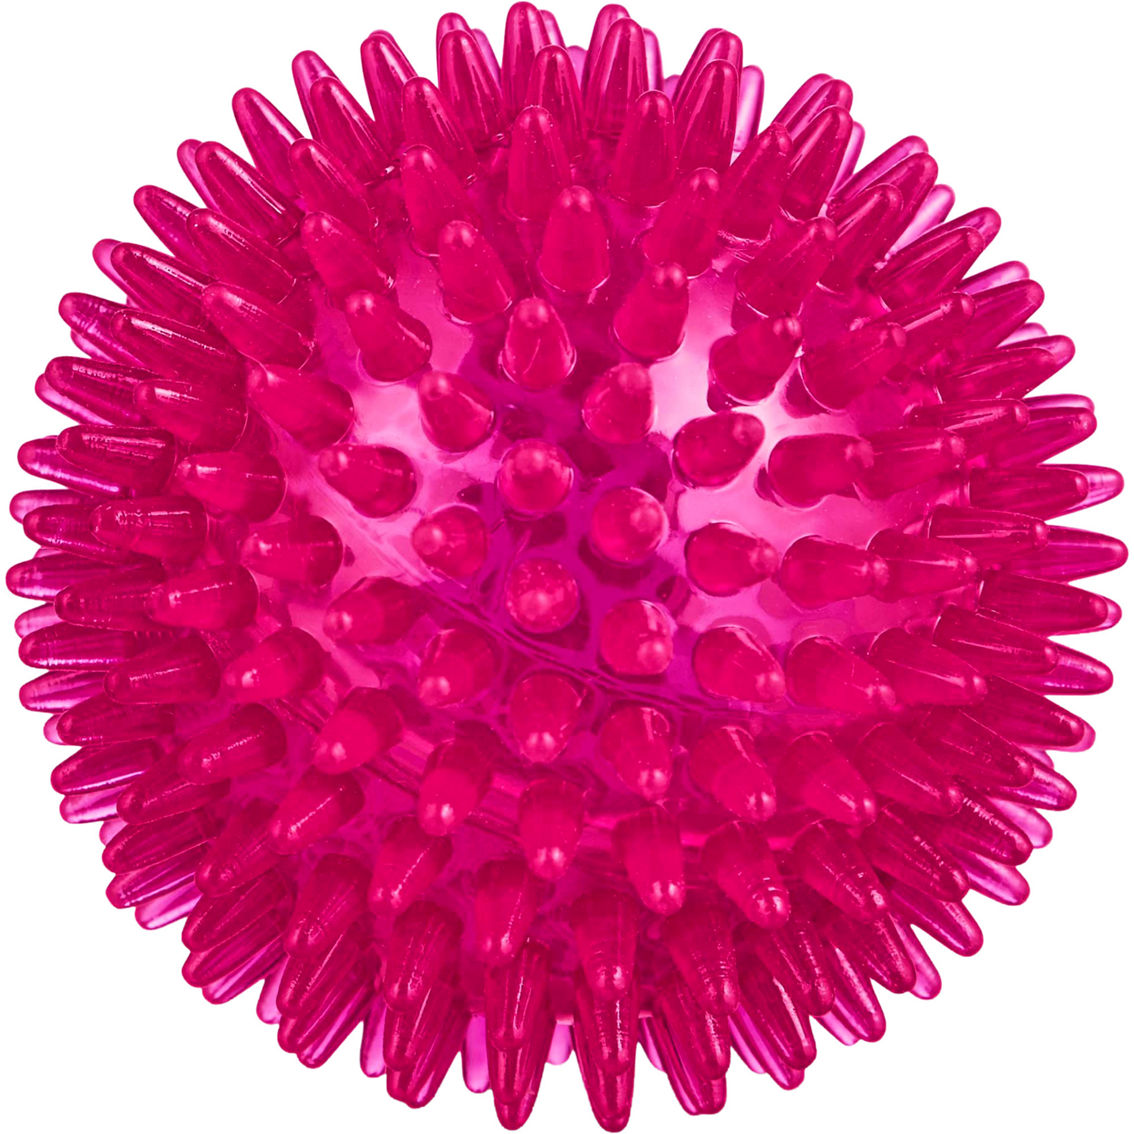 Leaps & Bounds Romp and Run Spiny Ball Dog Toy - Image 5 of 5